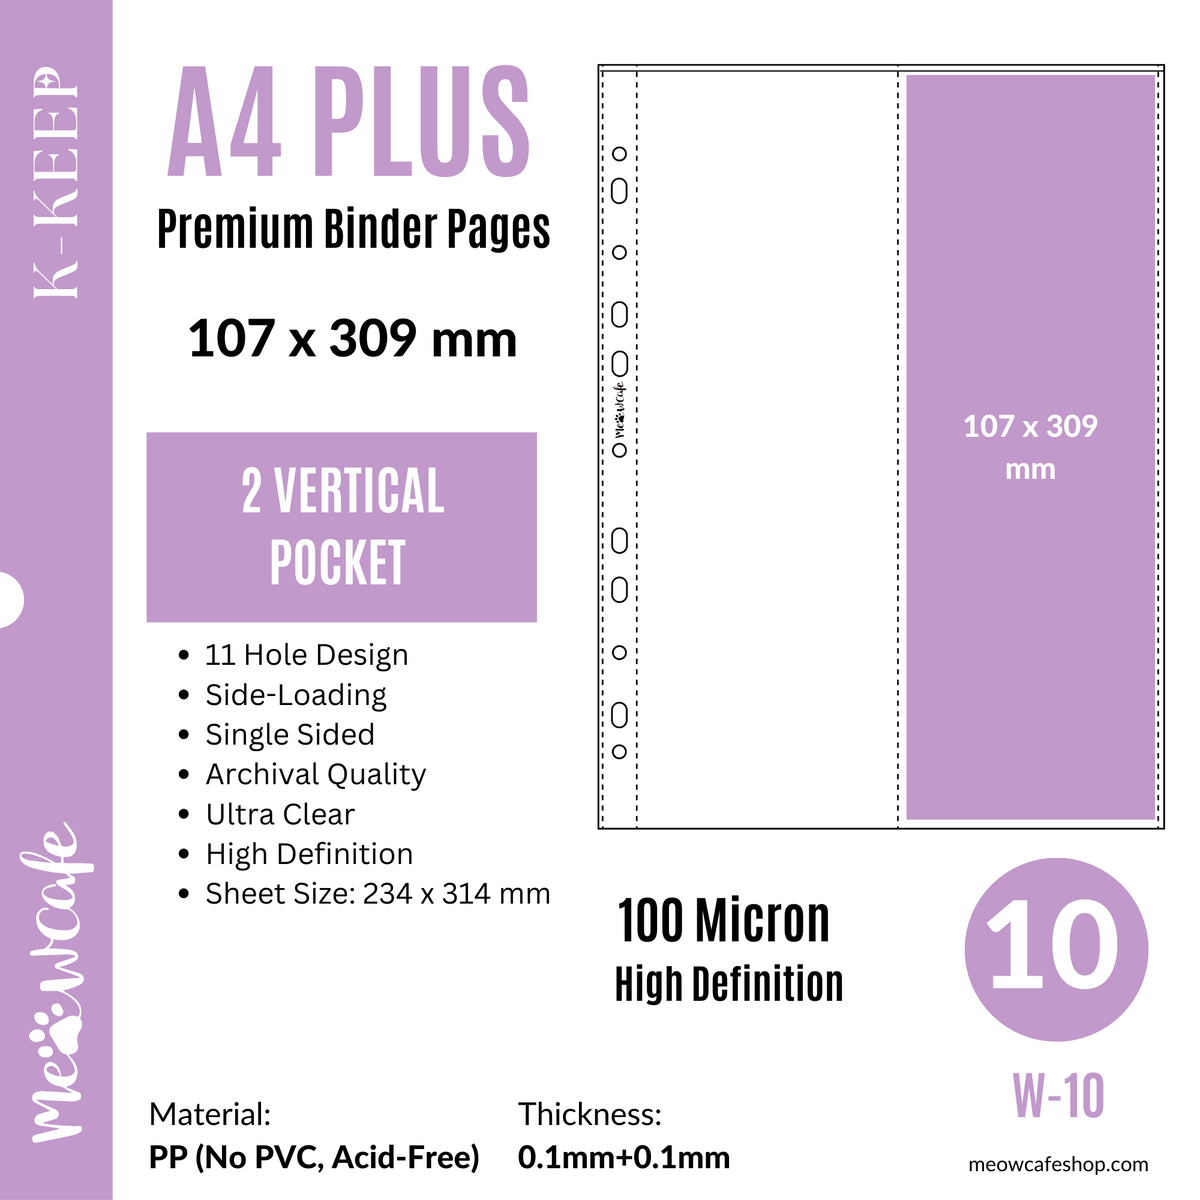 K-KEEP [A4 PLUS] -  2 Vertical Pocket - 11 Holes Premium Binder Pages, 100 Micron Thick, High Definition (Pack of 10) - (W-10)